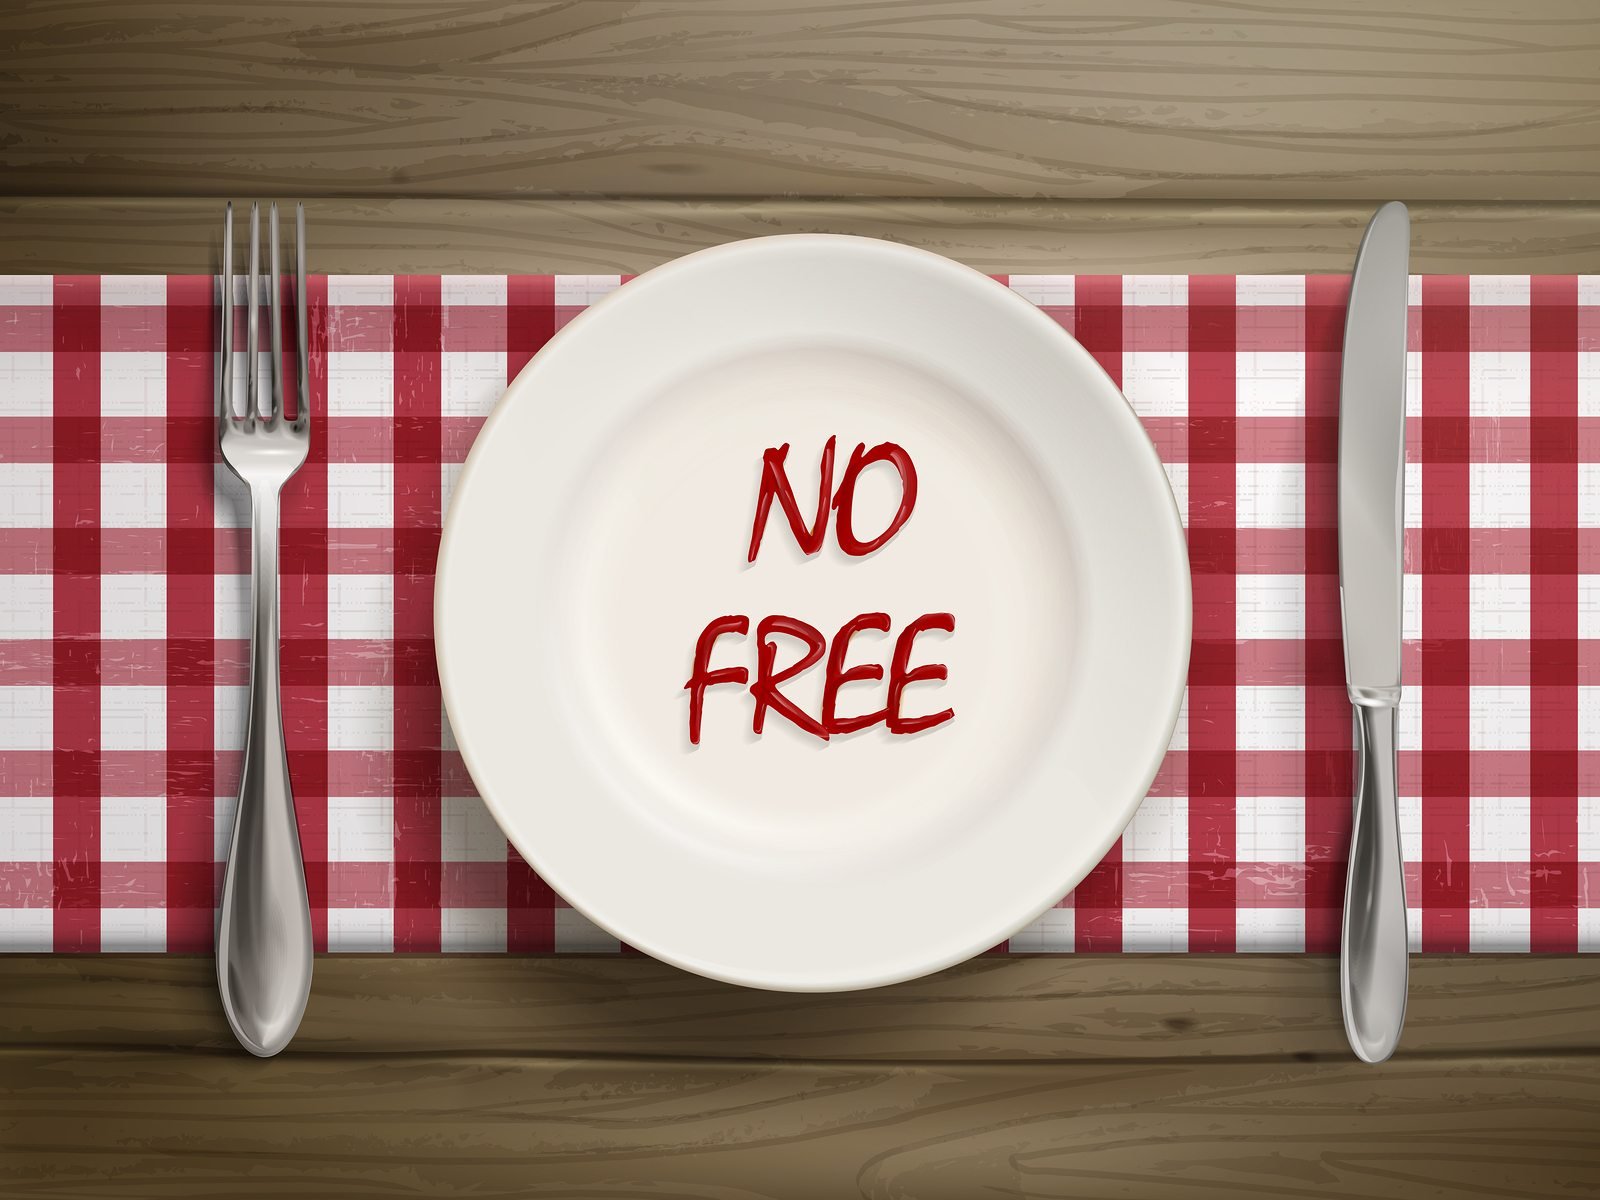 No Free Written By Ketchup On A Plate